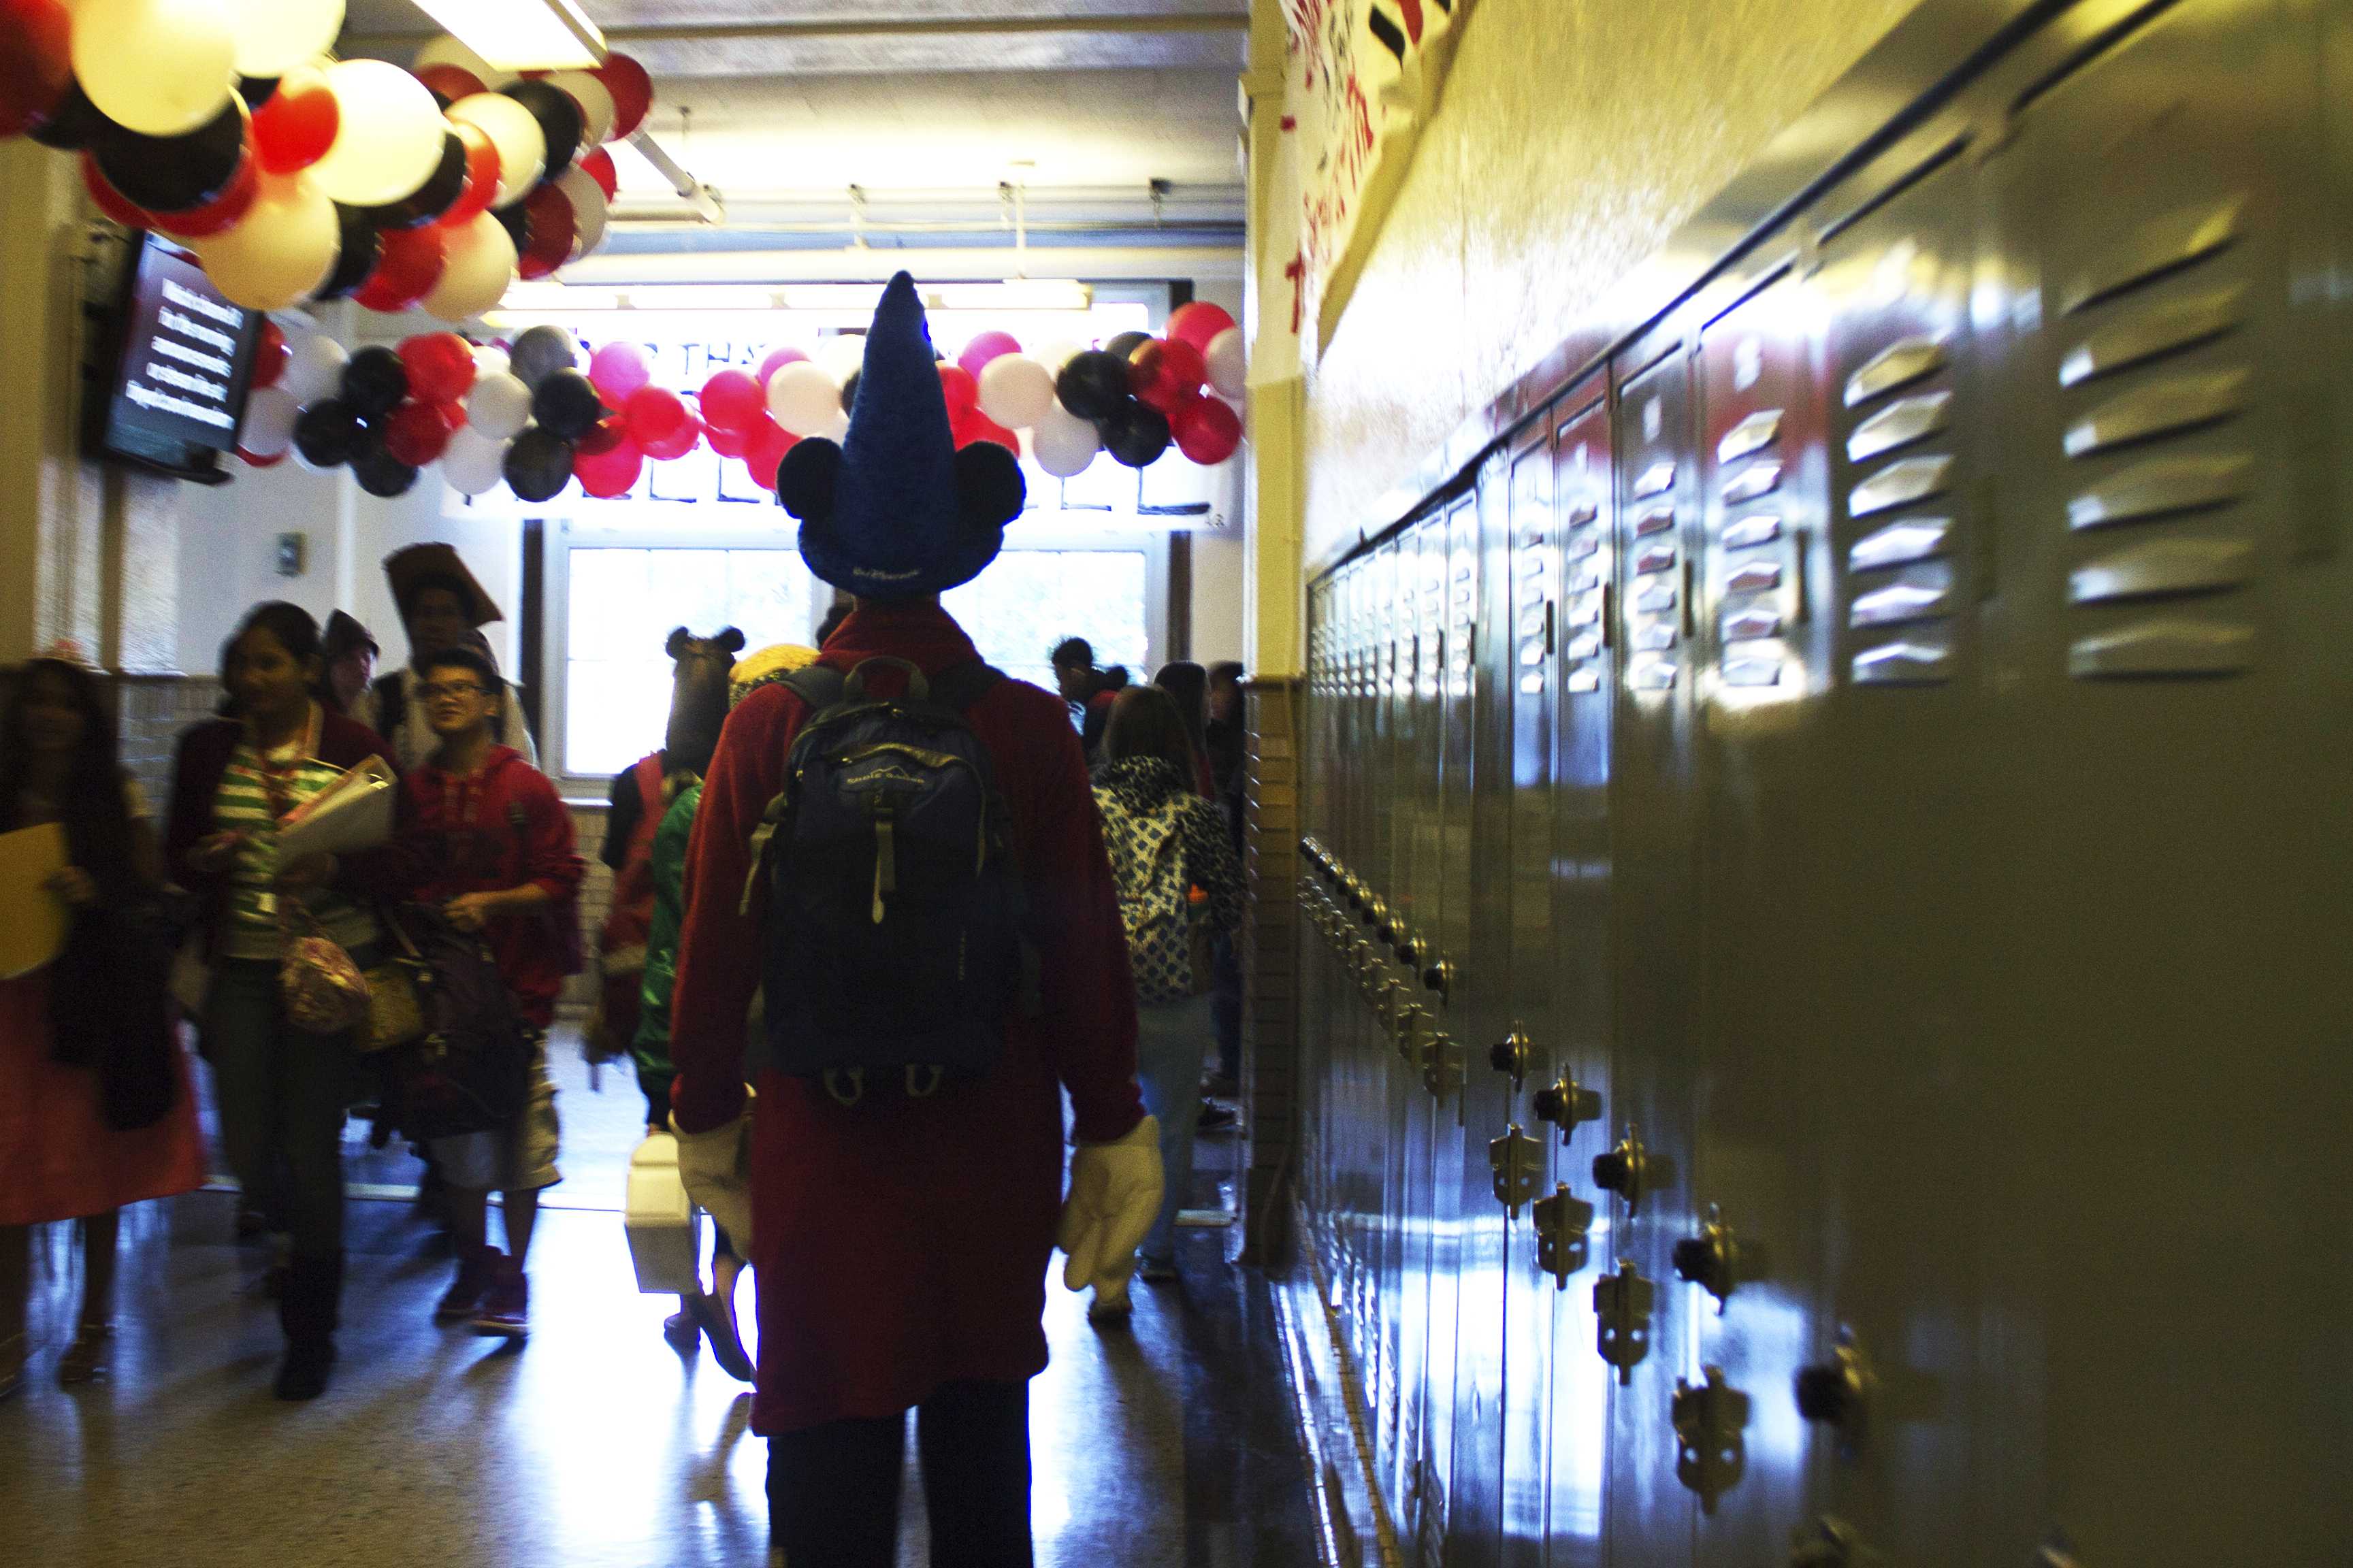 The one who started it all, Mickey Mouse, is seen walking through the decorated hallways. Photo by Olivia Cook